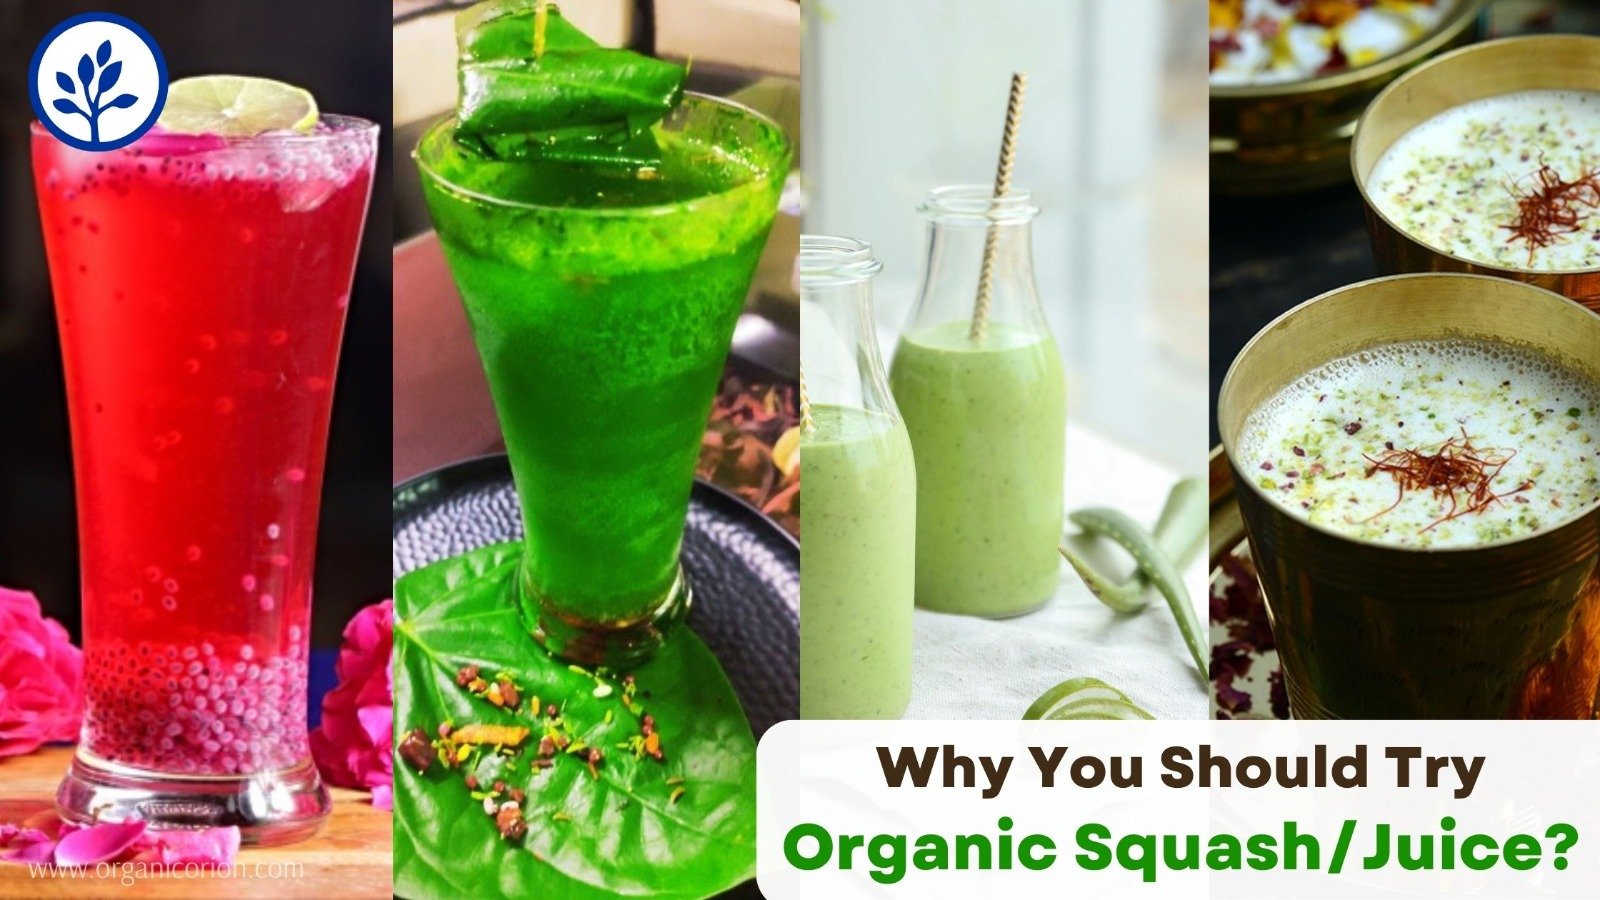 Why You Should Try Organic Squash/ Juice?